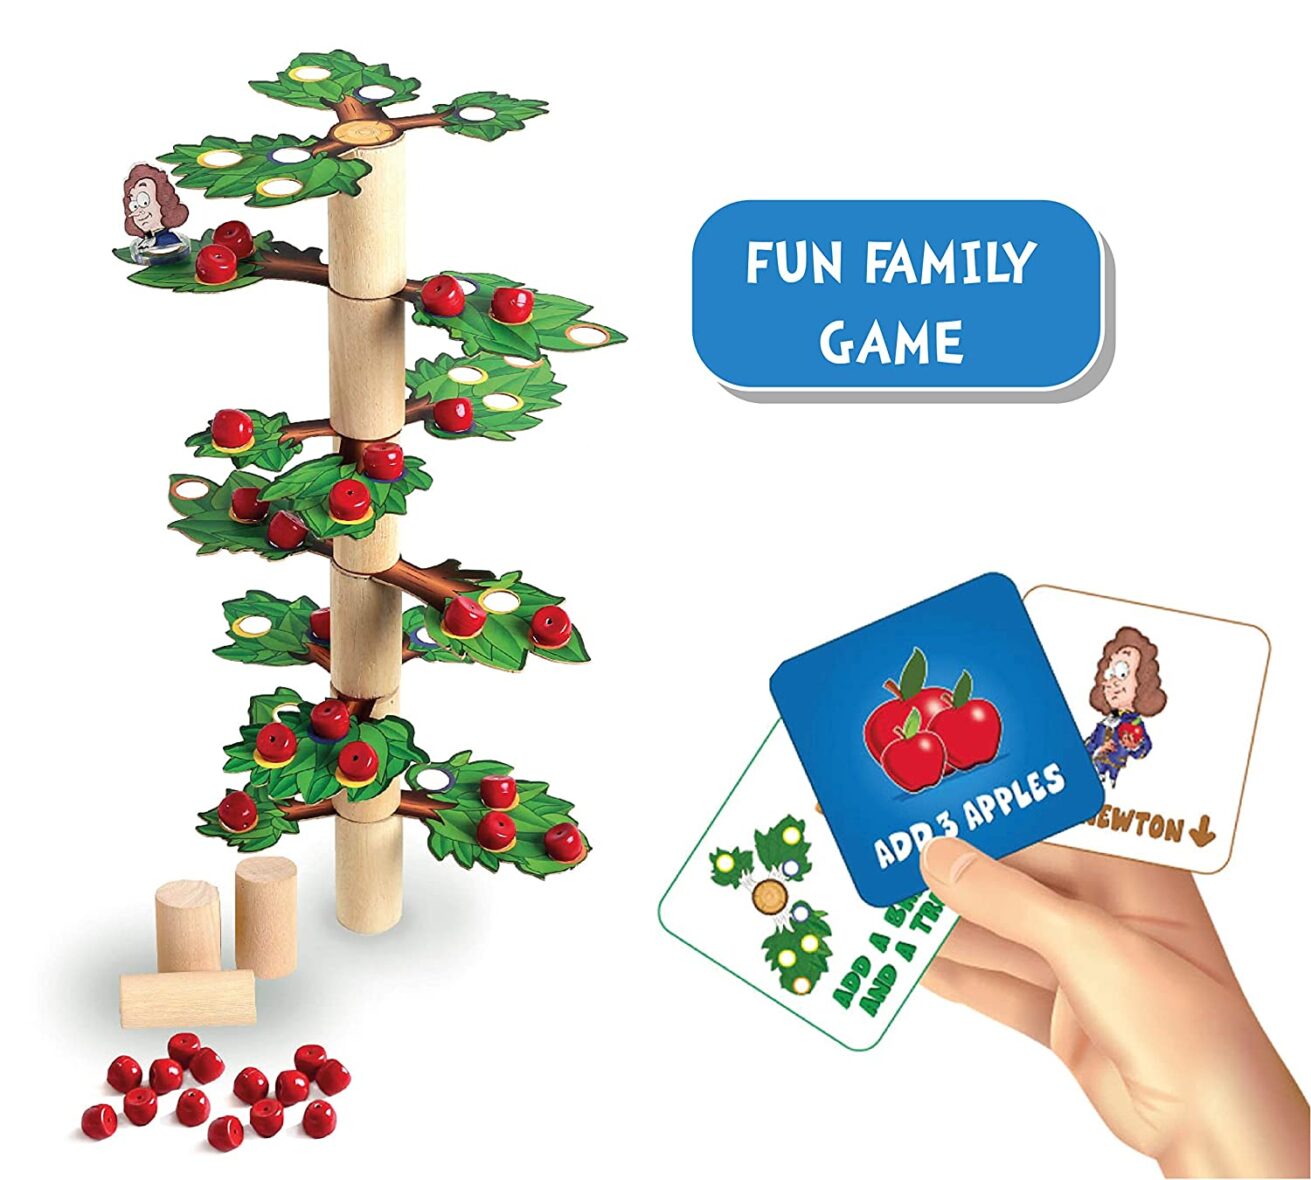 Skillmatics Newton’s Tree | Fun Family Game of a Tumbling Tree | Gifts for Ages 6 and Up | Balancing, Stacking, Strategy and Skill Building